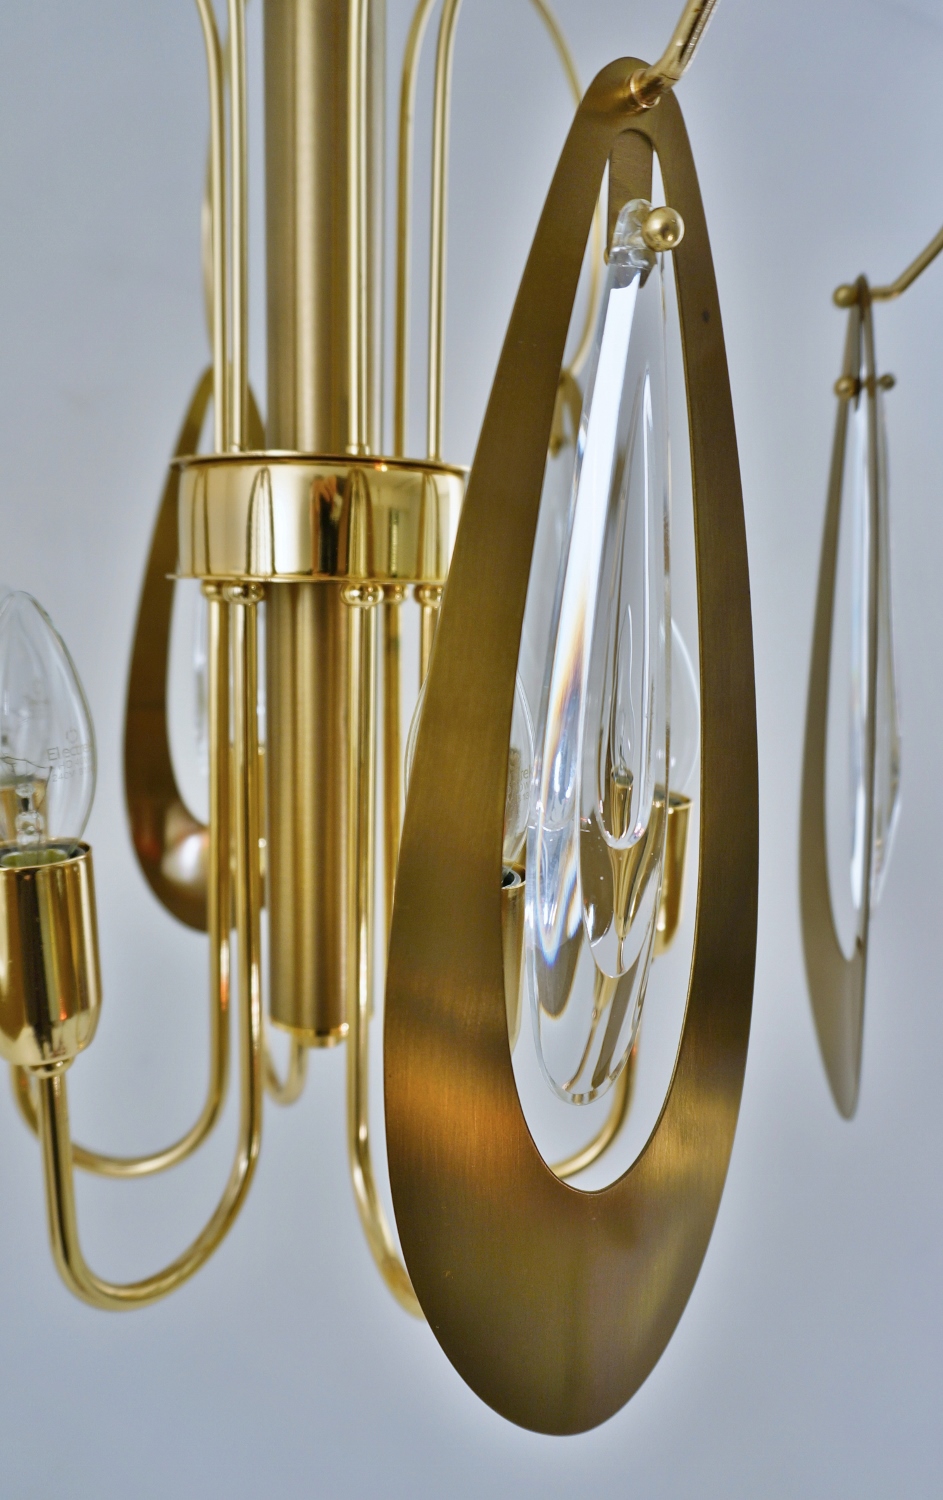 Small ornate gold-plated brass chandelier from Italy — italian